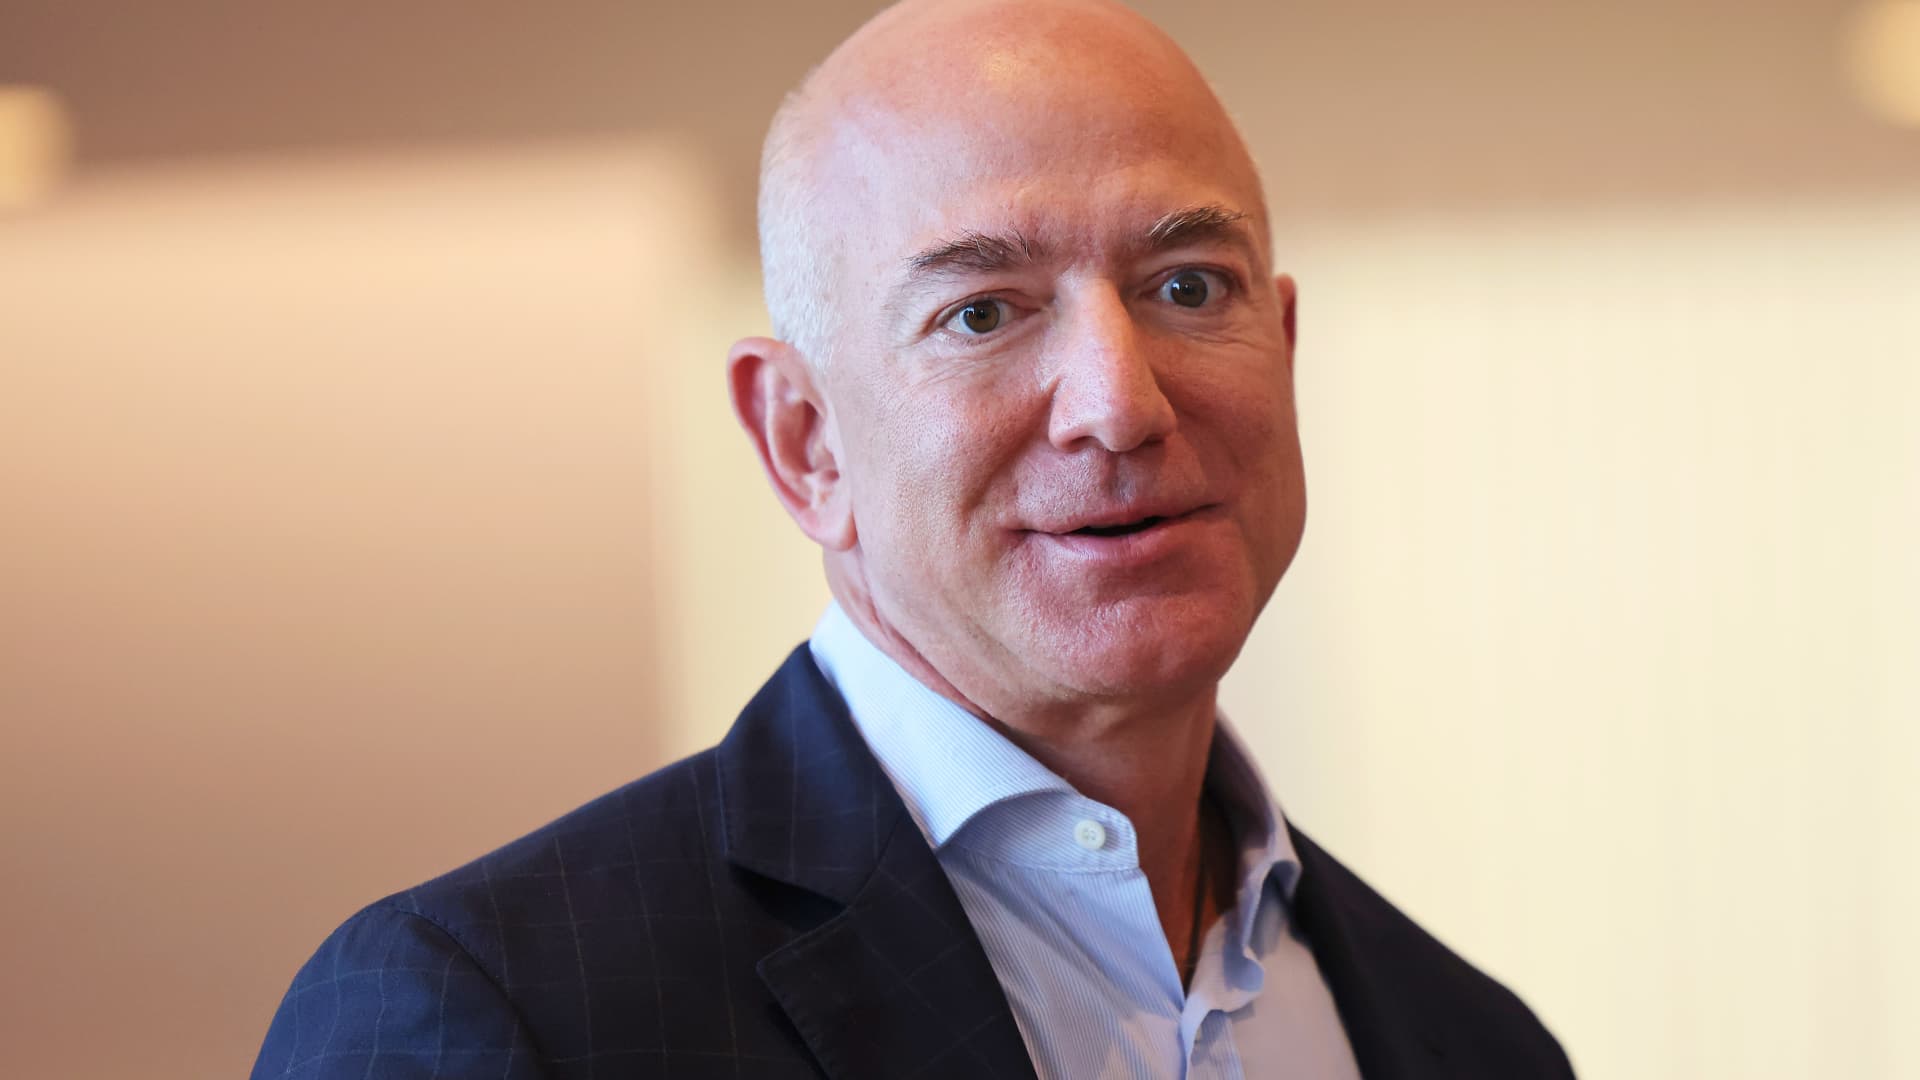 Here are the 7 richest people in the world who haven’t signed the Giving Pledge—Jeff Bezos is No. 3